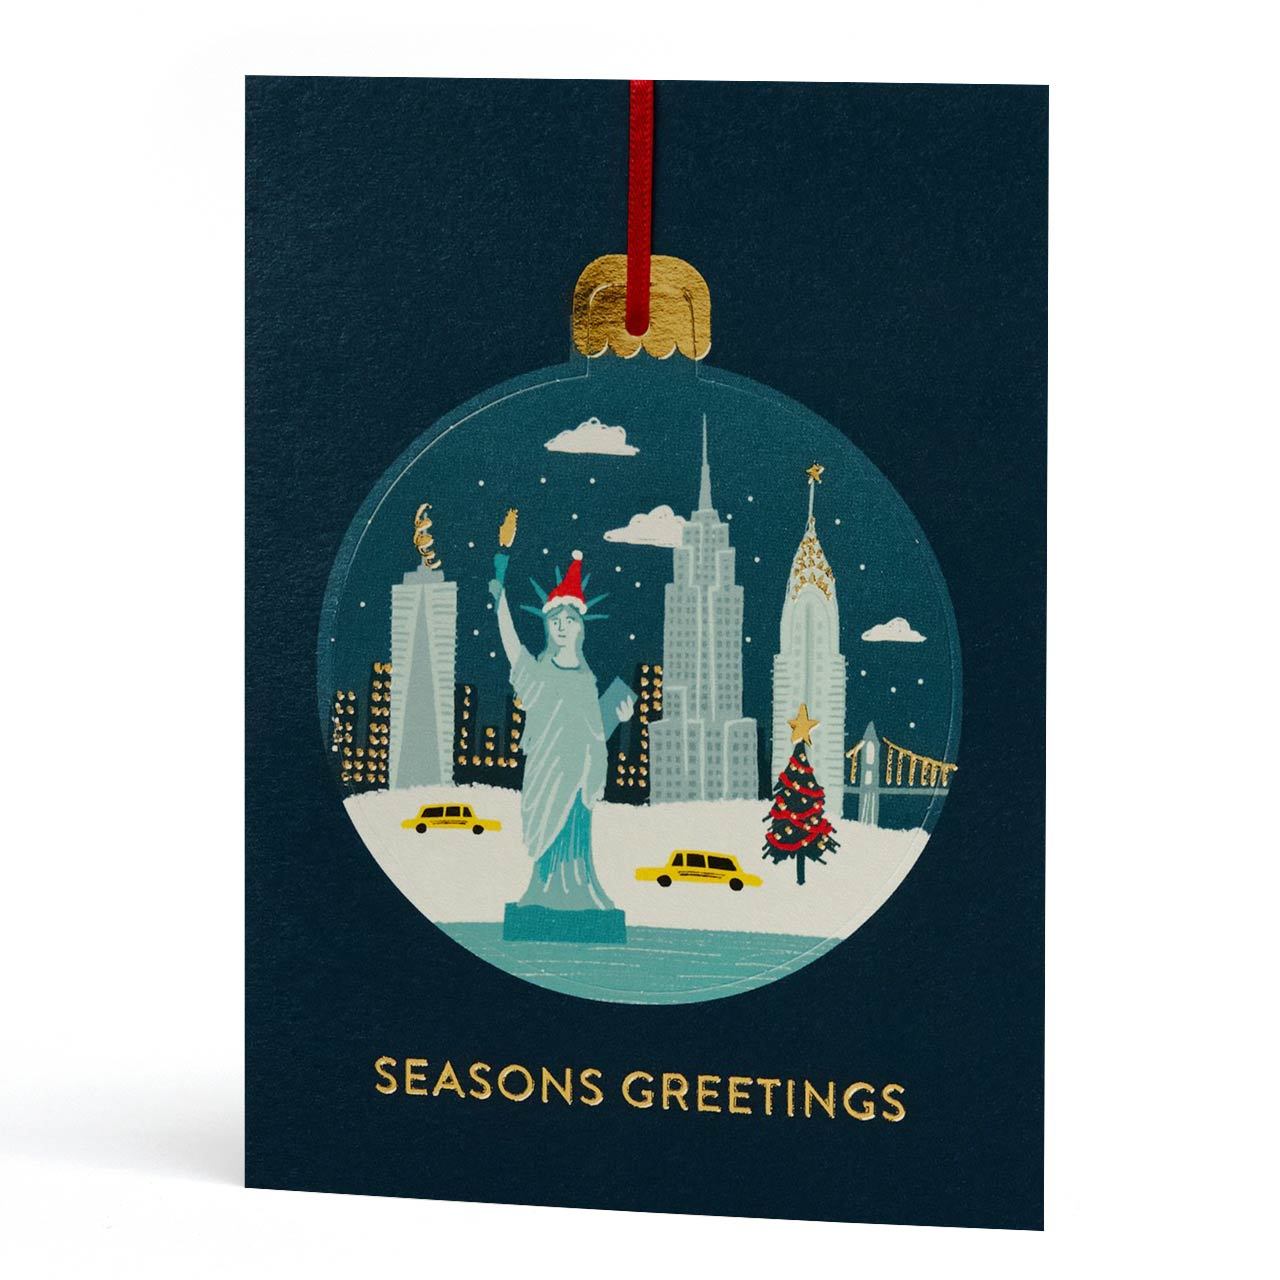 New York In The Snow Gold Foil Bauble Greeting Card